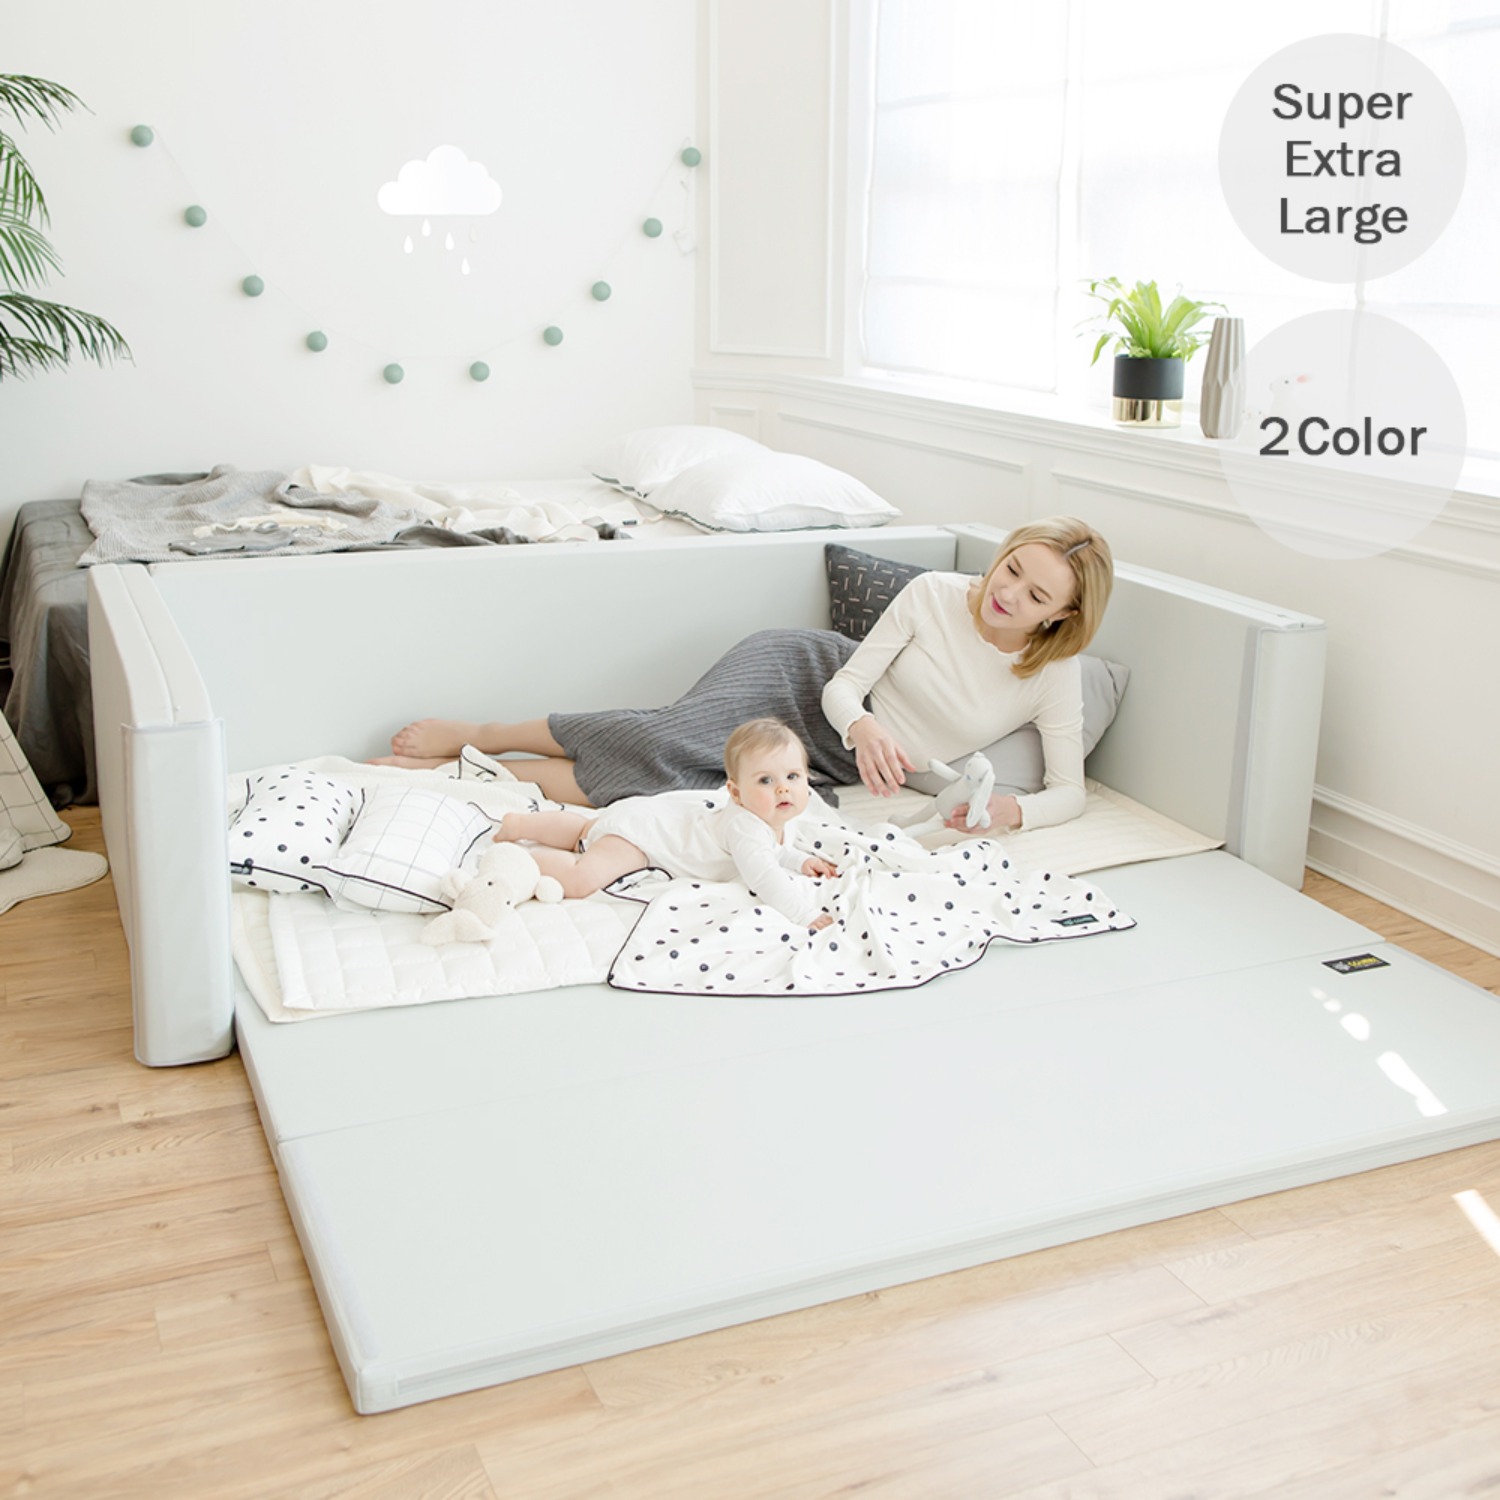 twin star bumper bed super extra large